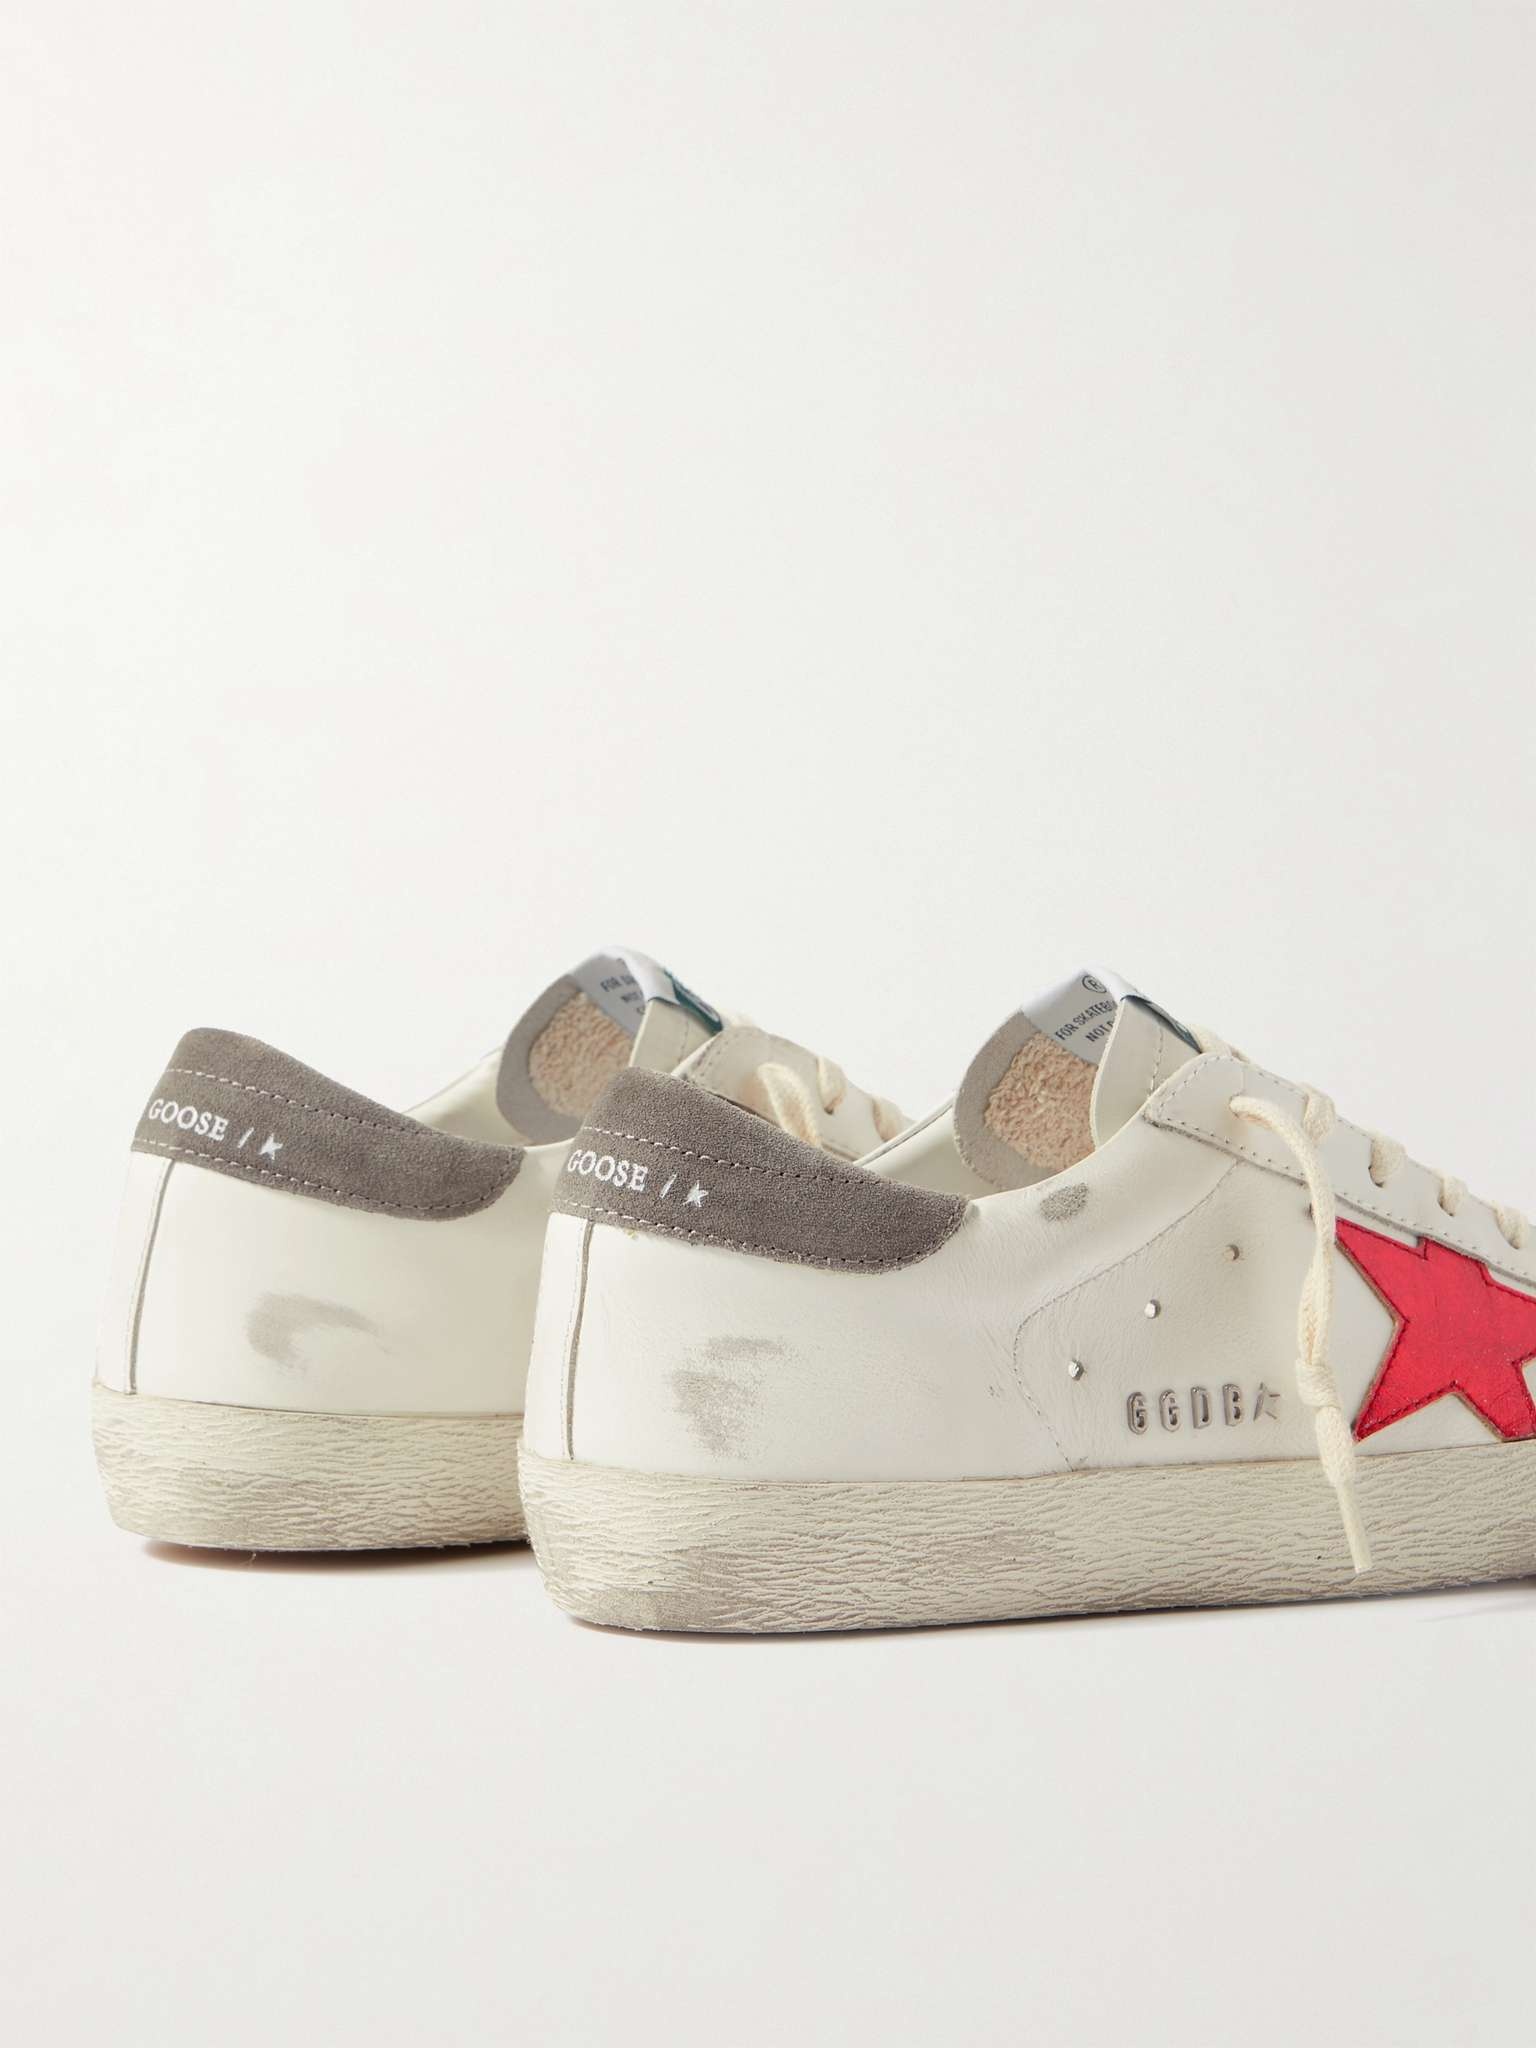 Superstar Distressed Leather and Suede Sneakers - 5